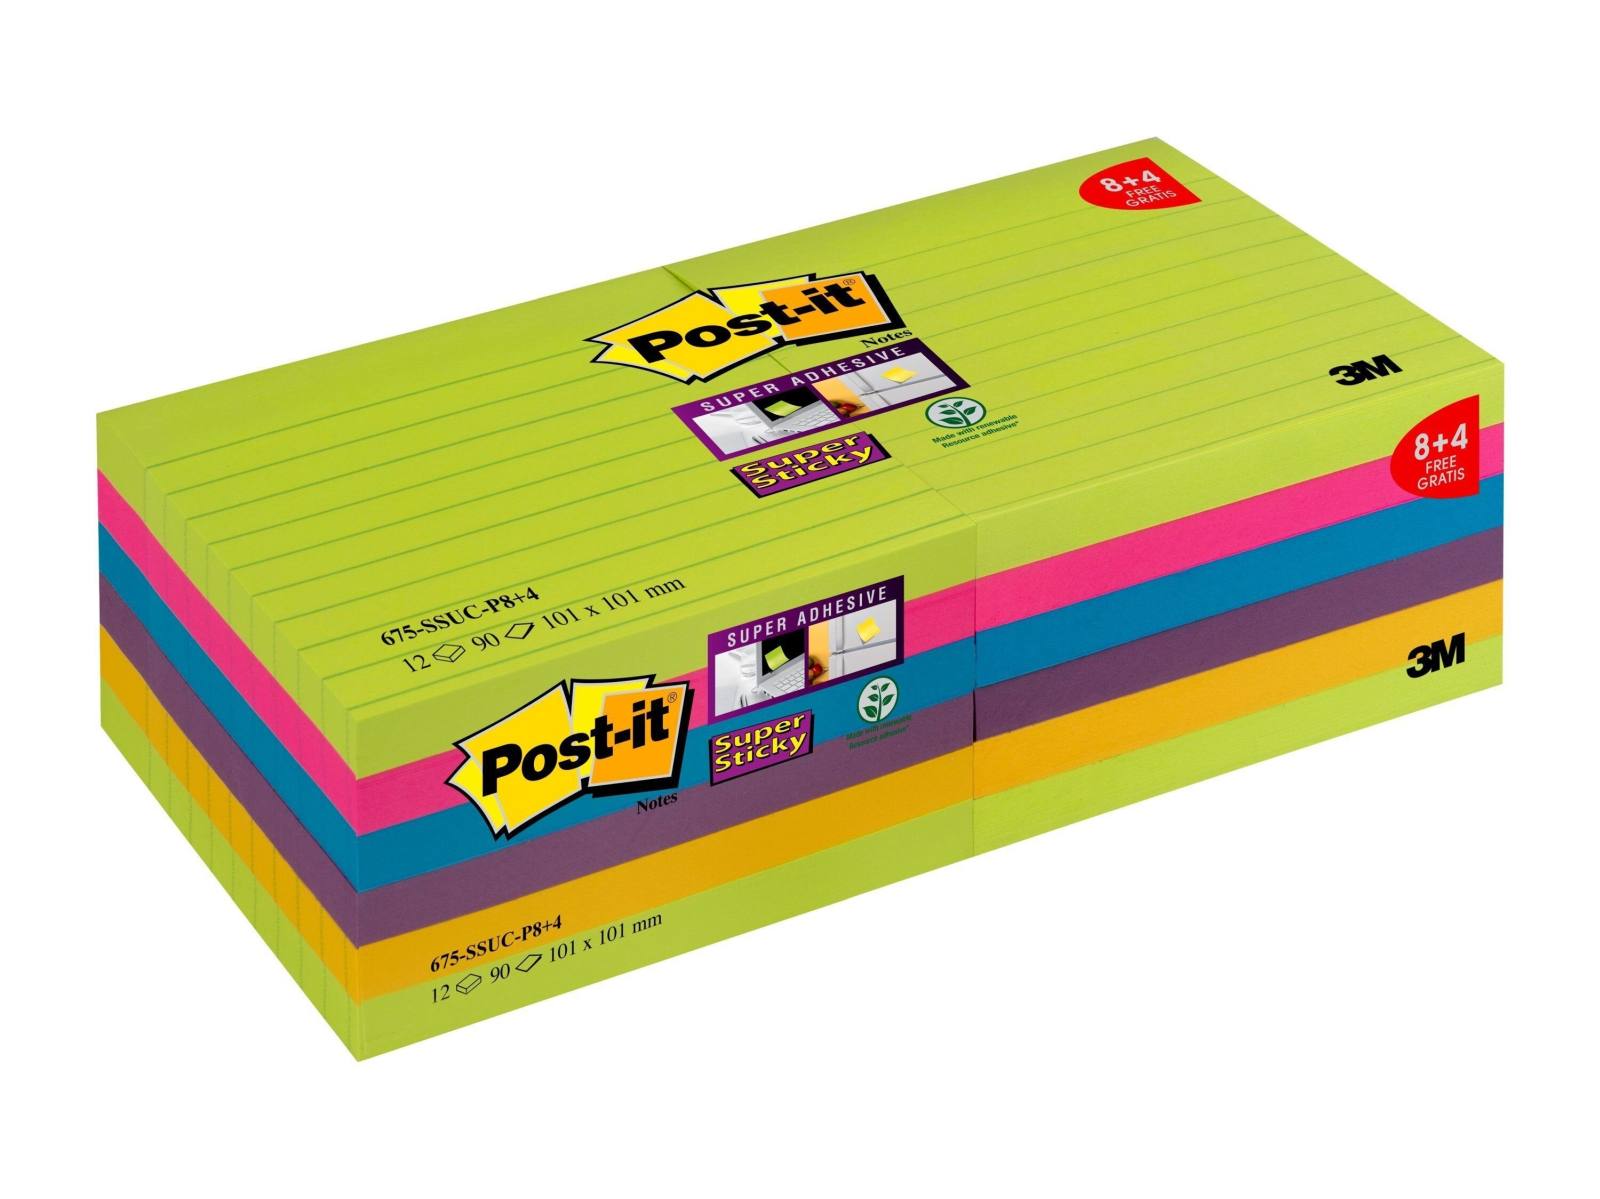 3M Post-it Super Sticky Notes Promotion 675-SSUC-P8+4 12 pads of 90 sheets each at a special price, neon green, ultra pink, ultra blue, plum purple, ultra yellow, 101 mm x 101 mm, lined, PEFC certified